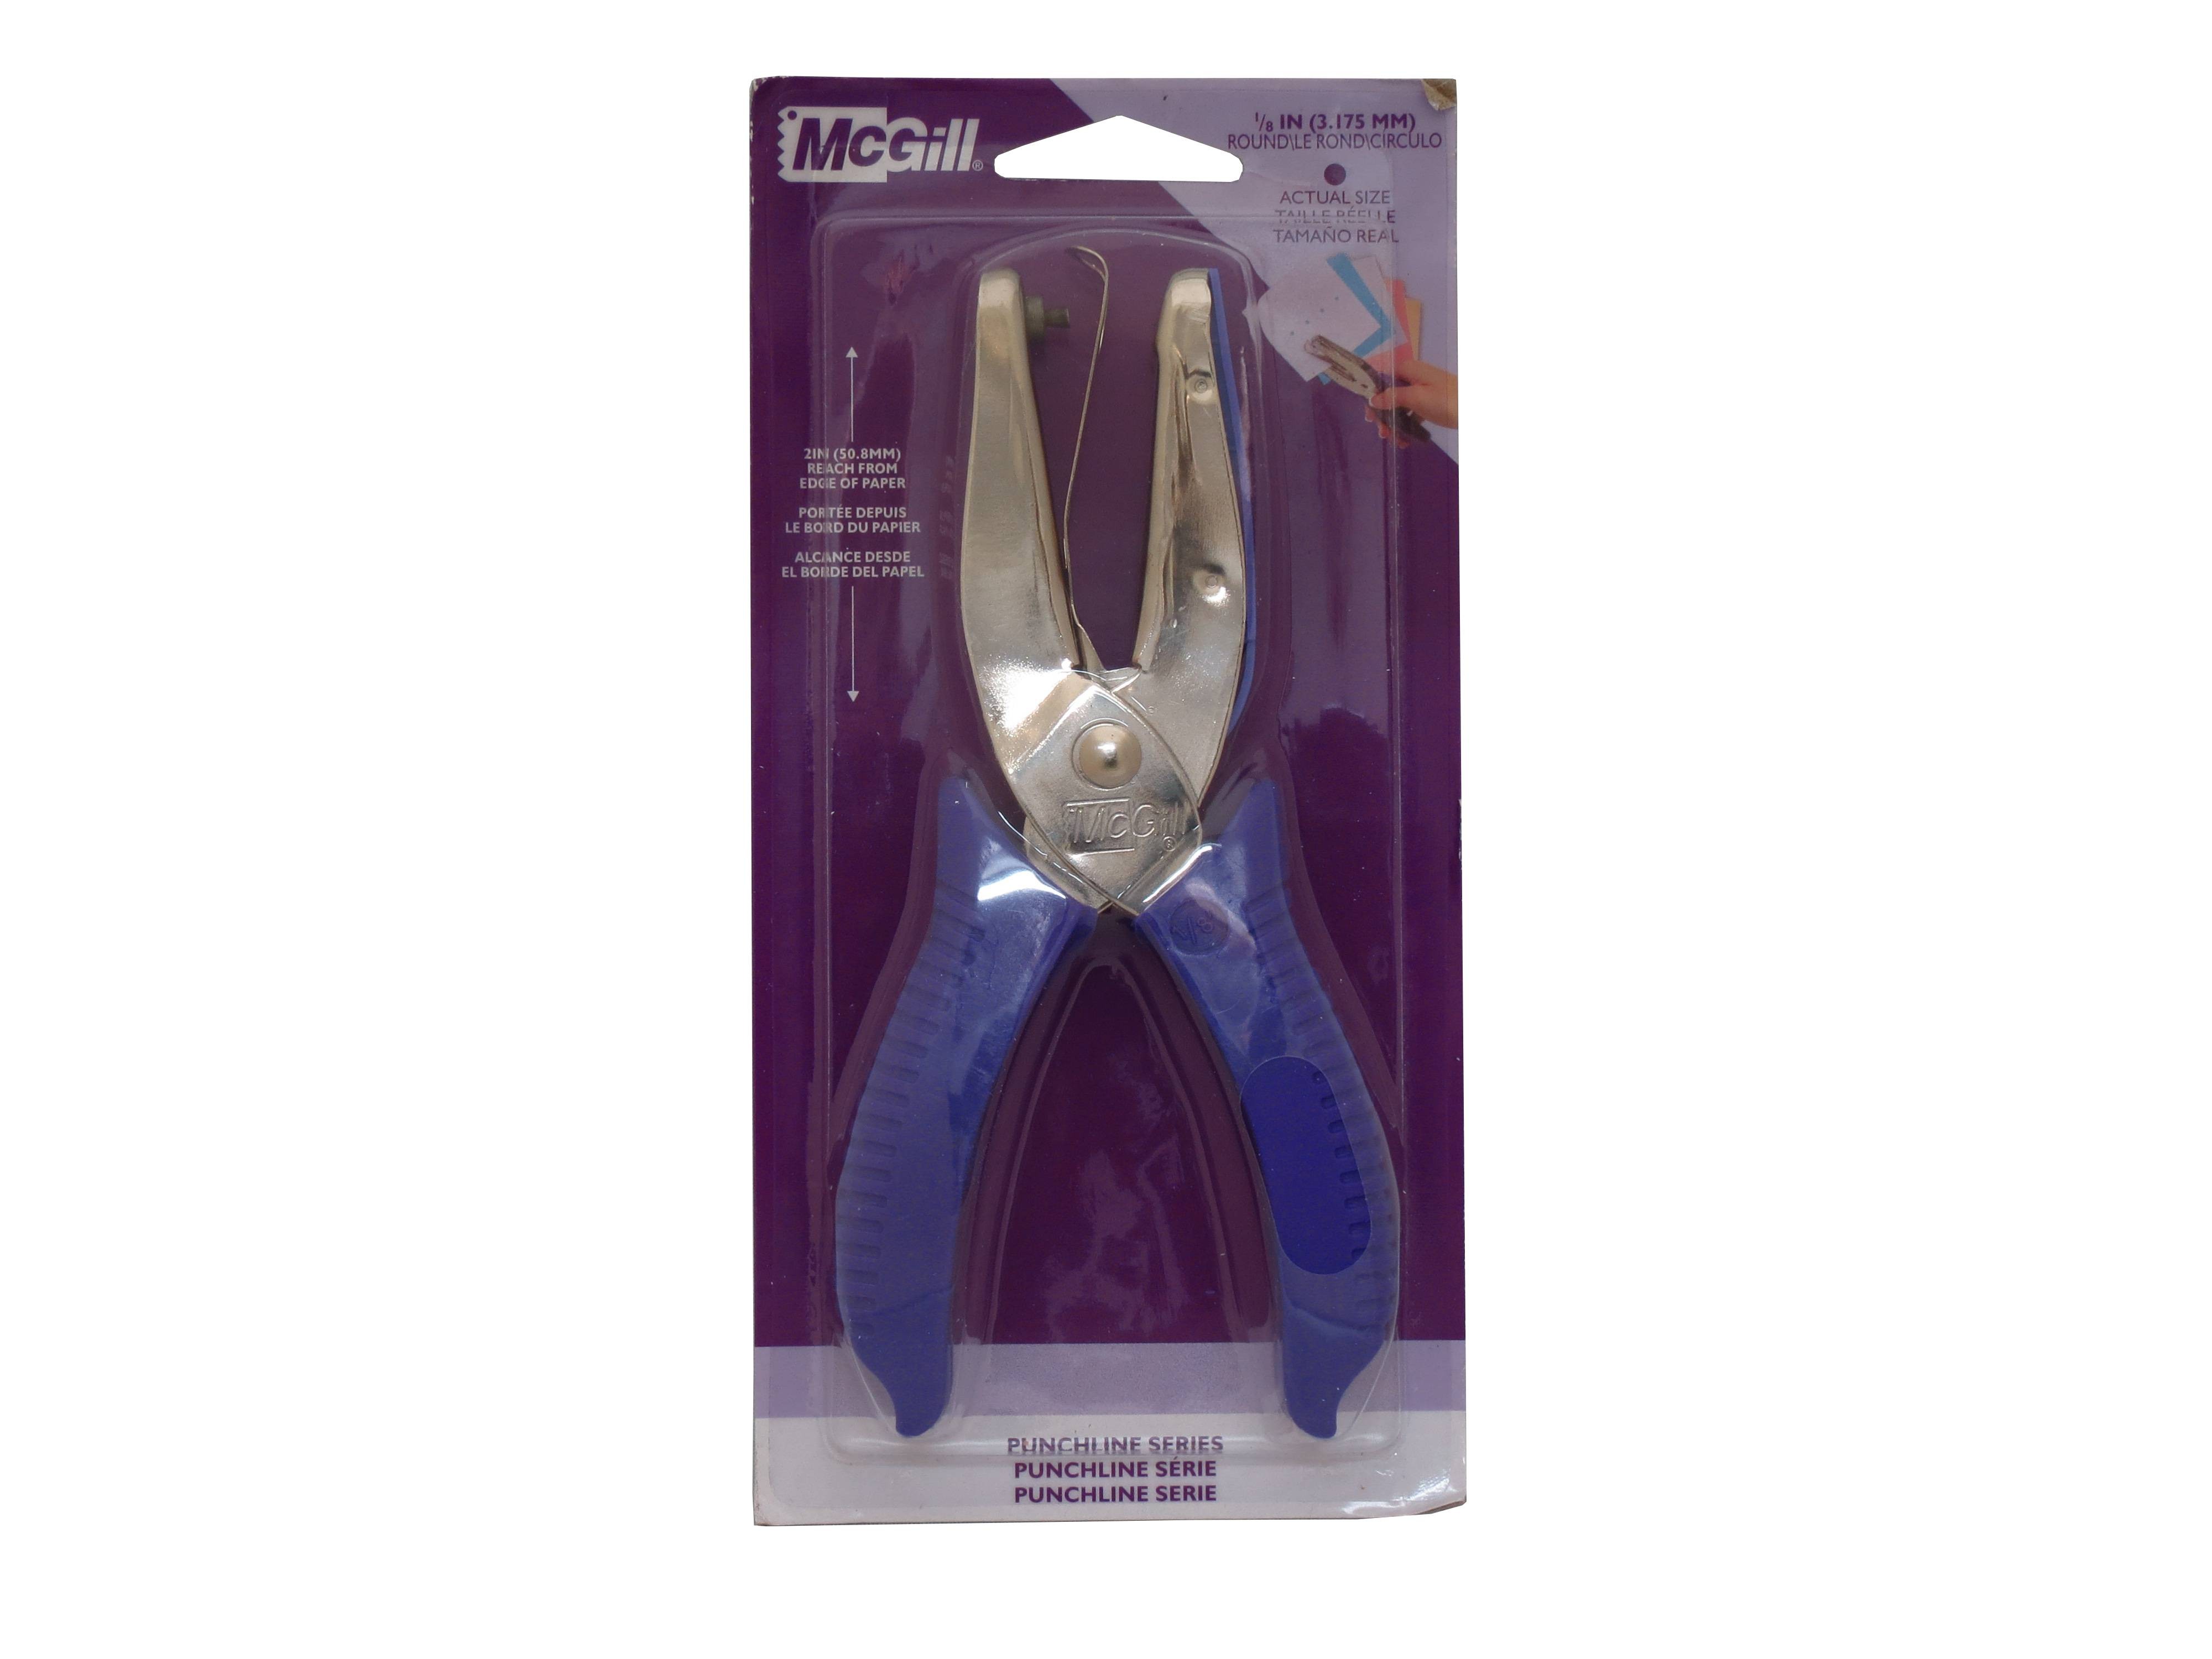 Fire Extinguisher Inspection Tag Punch Pliers For Paper and Plastic